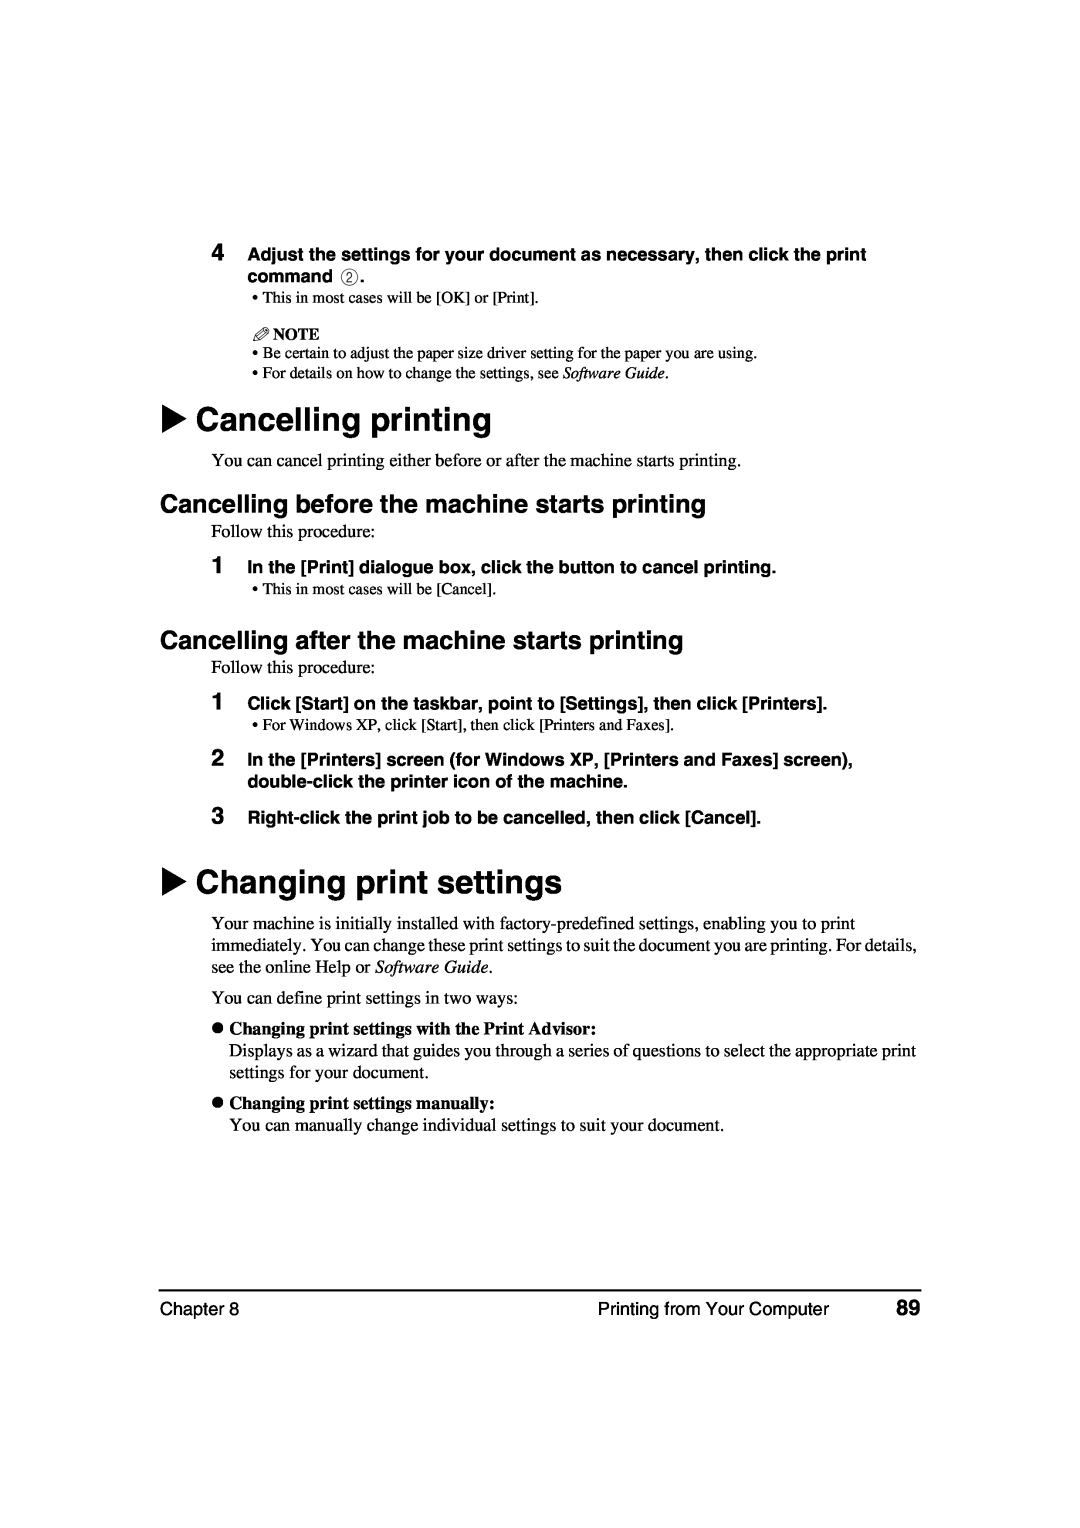 Canon MP370, MP360 manual Cancelling printing, Changing print settings, Cancelling before the machine starts printing 